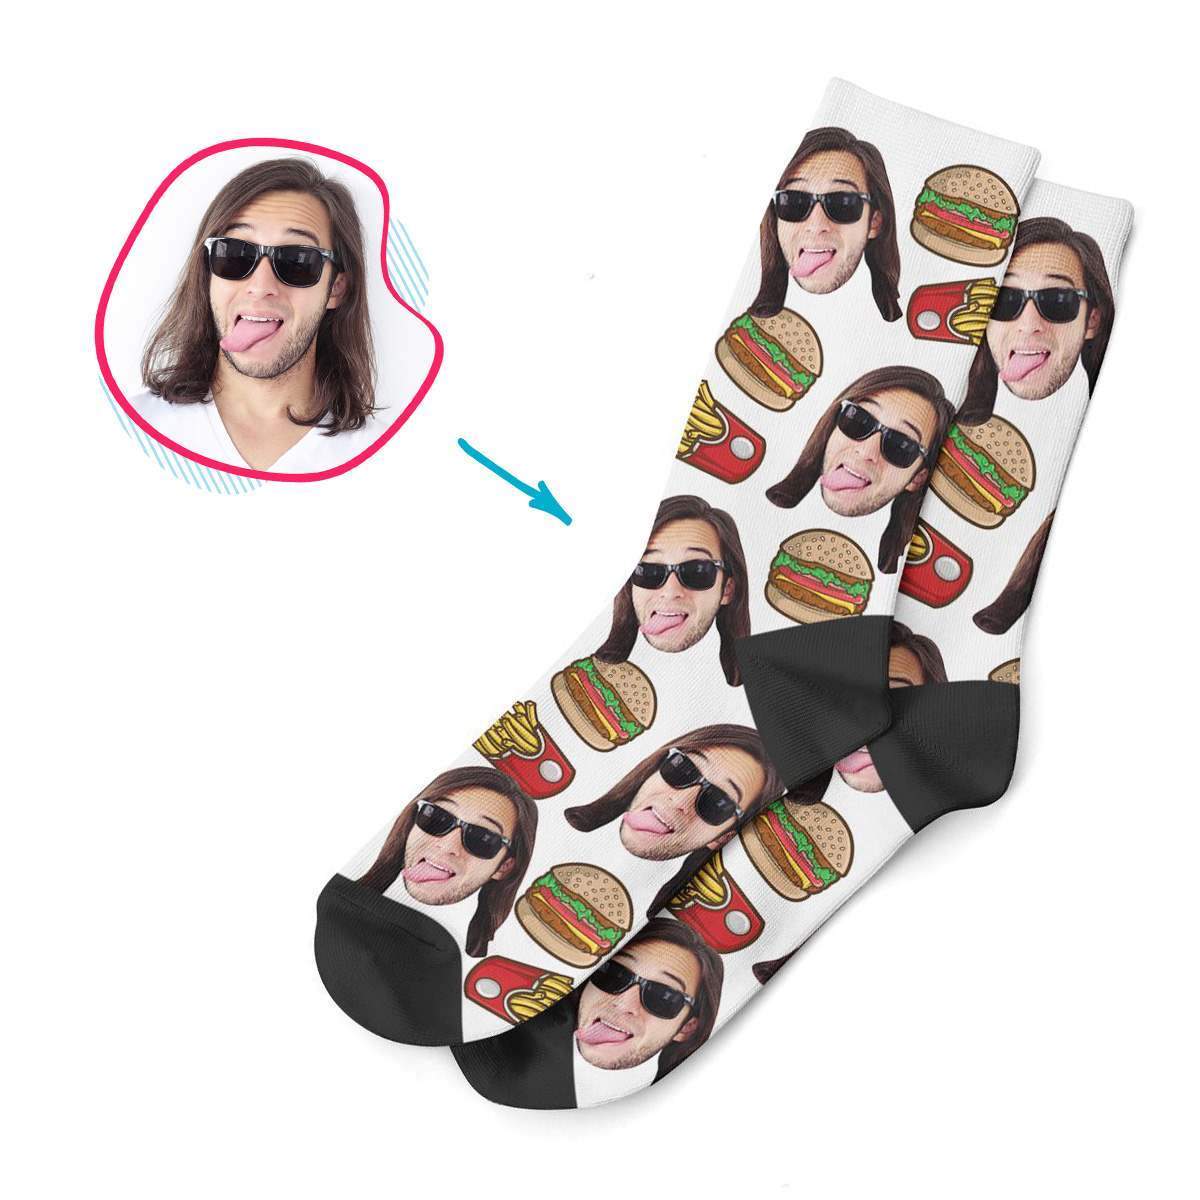 white Fastfood socks personalized with photo of face printed on them